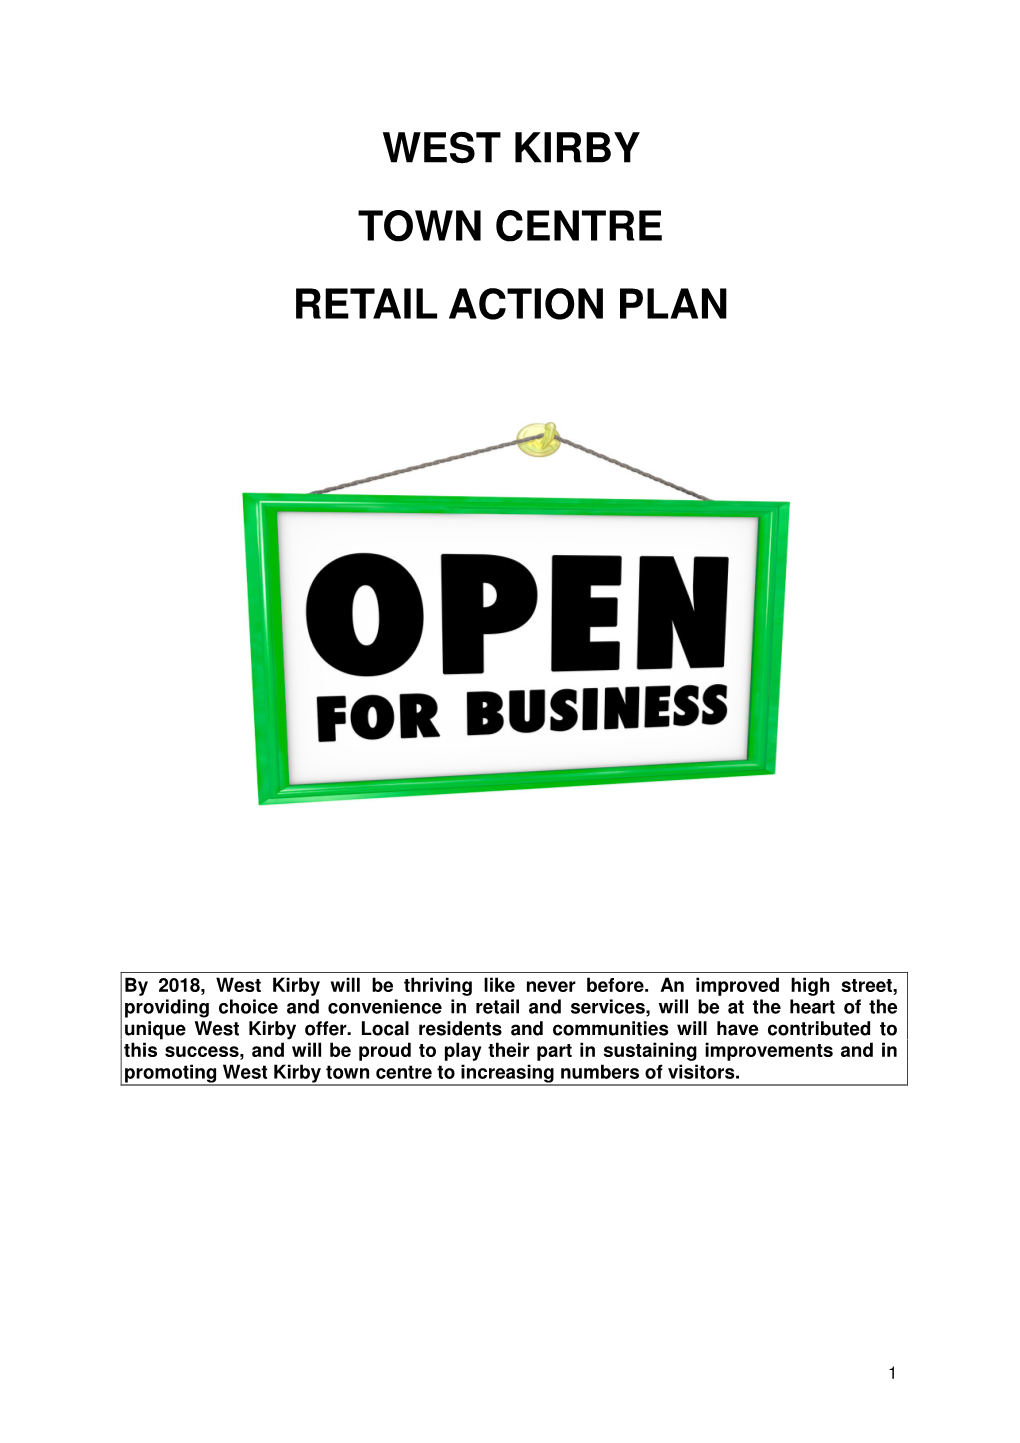 West Kirby Town Centre Retail Action Plan